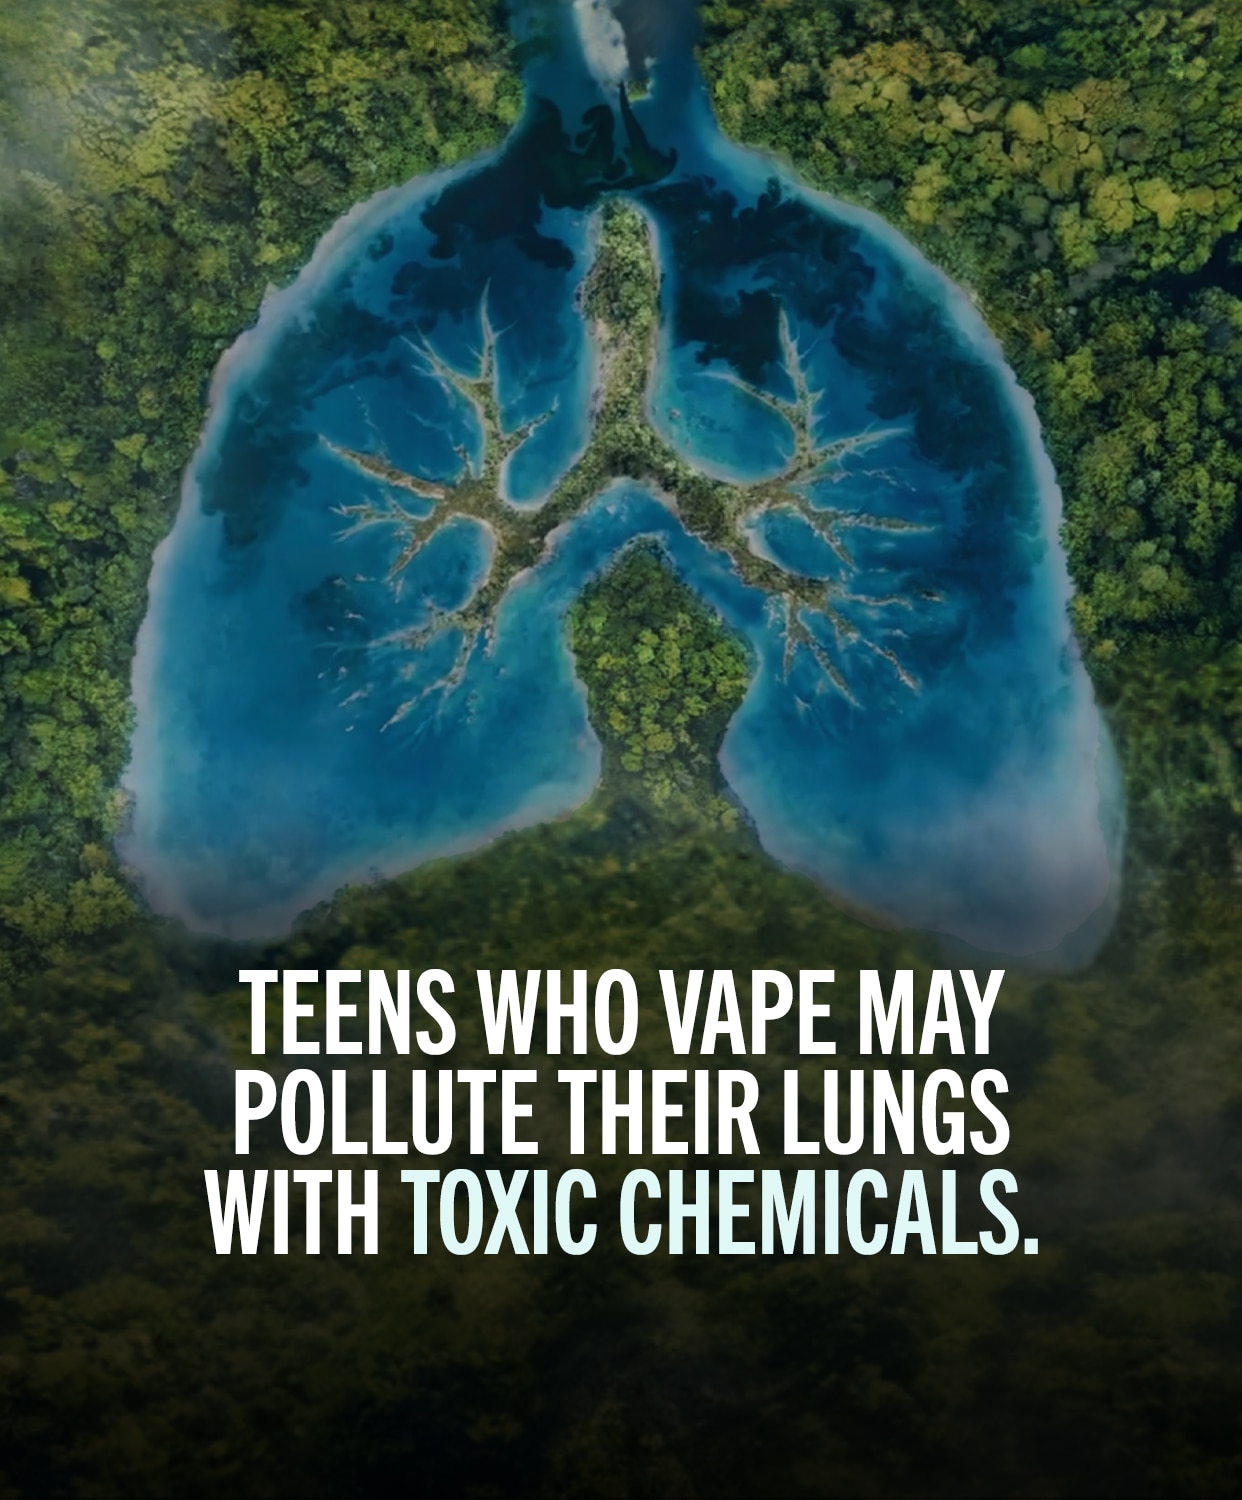 Teens who vape may pollute their lungs with toxic chemicals.